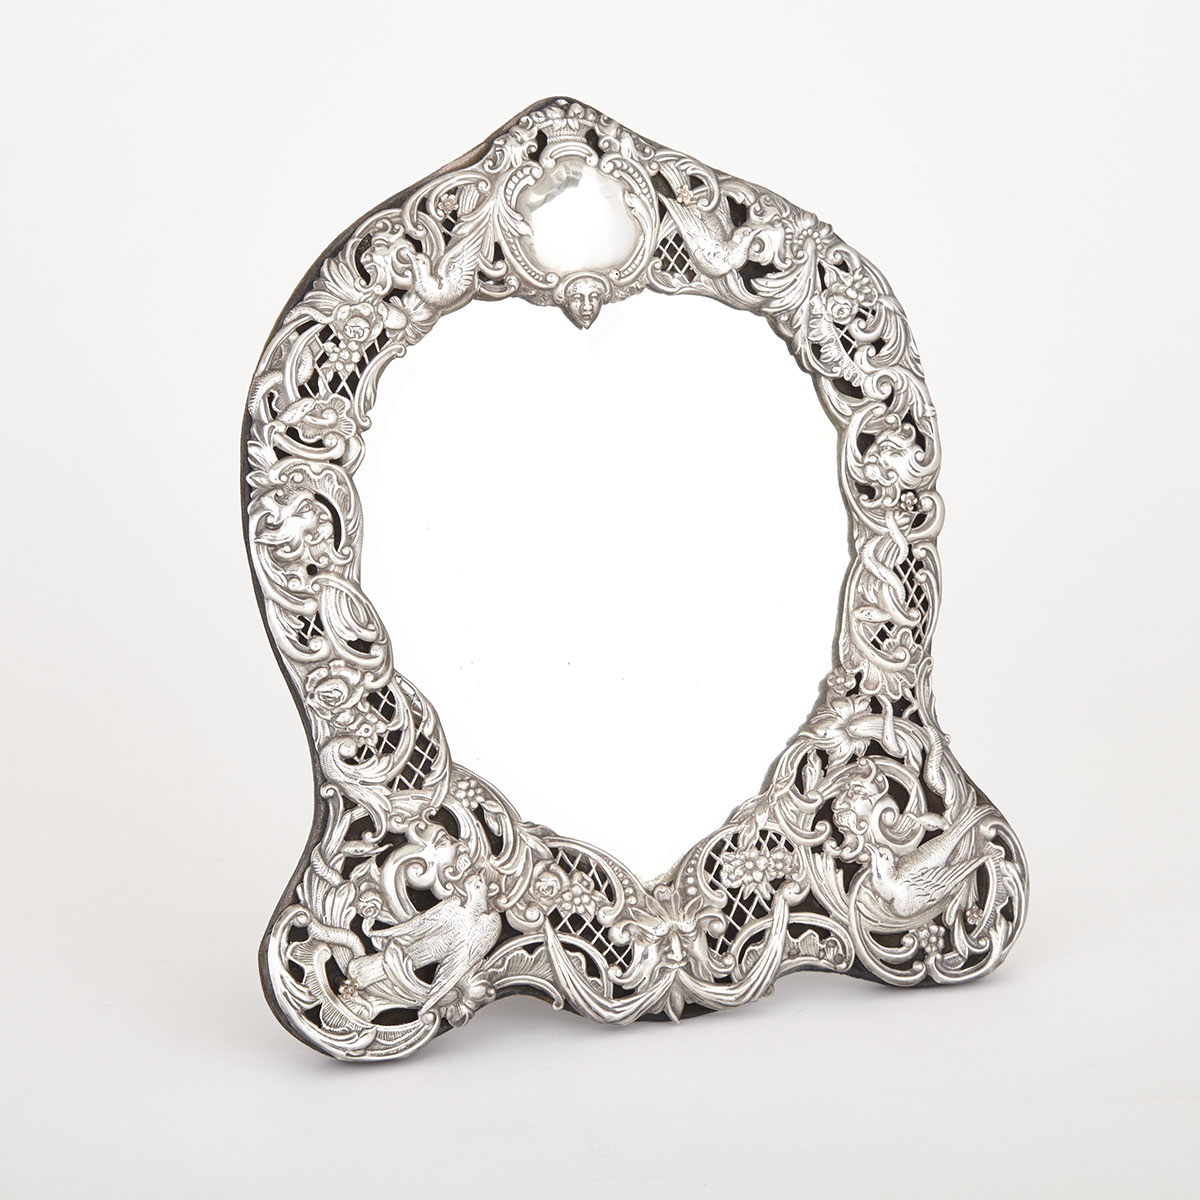 Victorian Silver Framed Heart Shaped Mirror, William Comyns, London, 1891